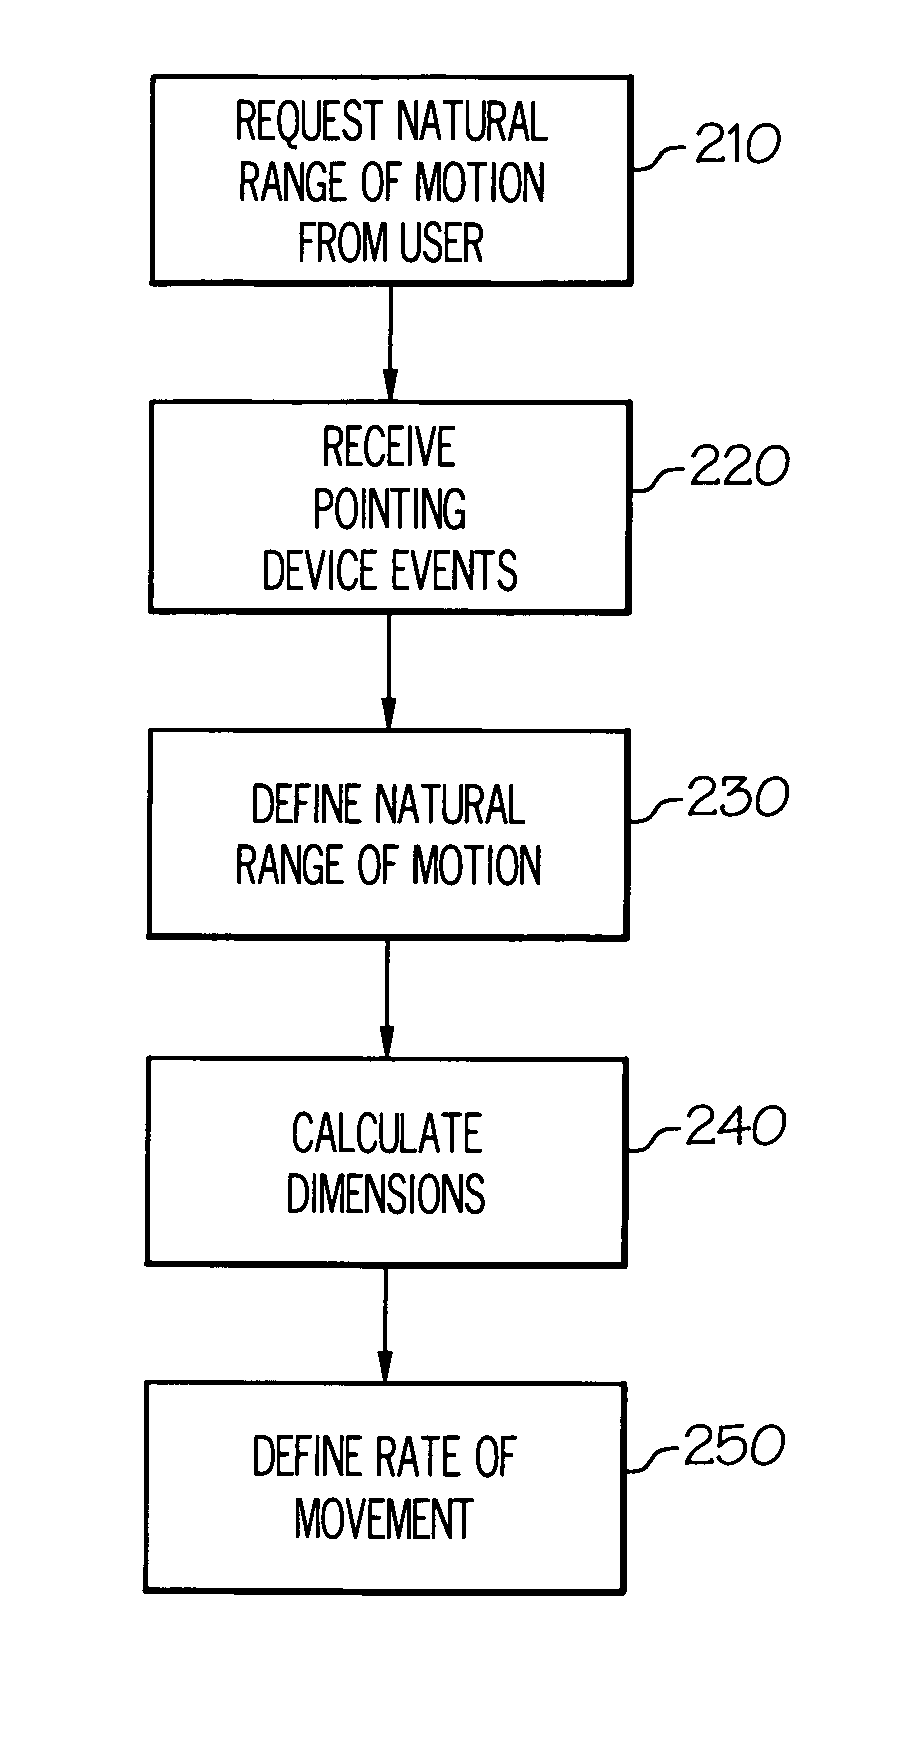 Autonomic control of calibration for pointing device